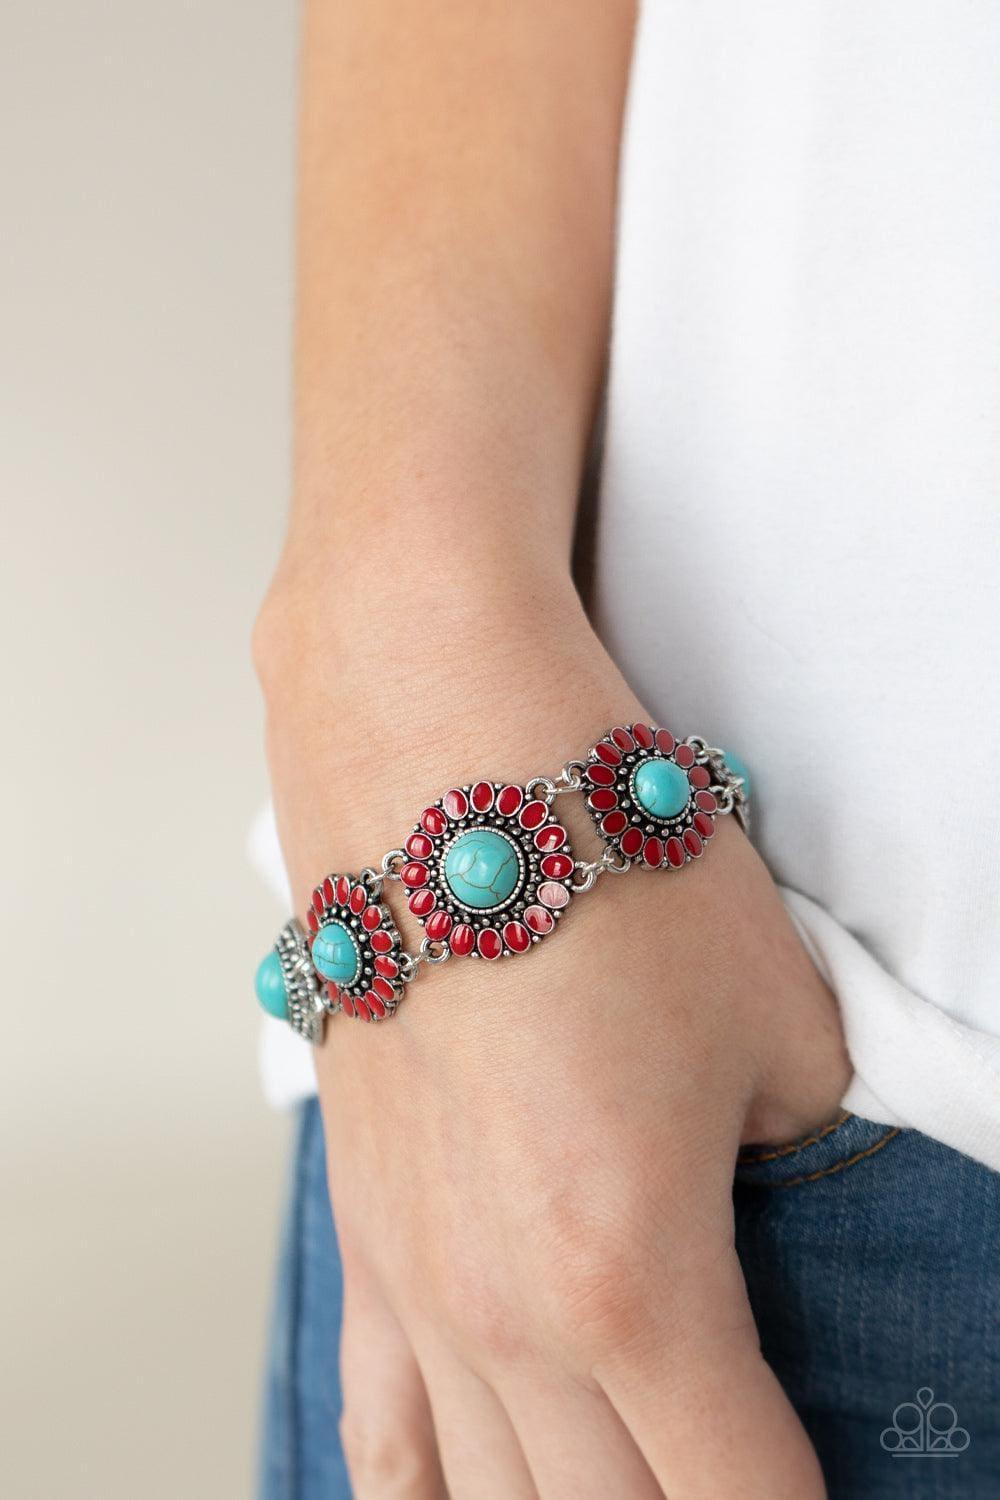 Paparazzi Accessories - Bodaciously Badlands - Red and Turquoise Bracelet - Bling by JessieK